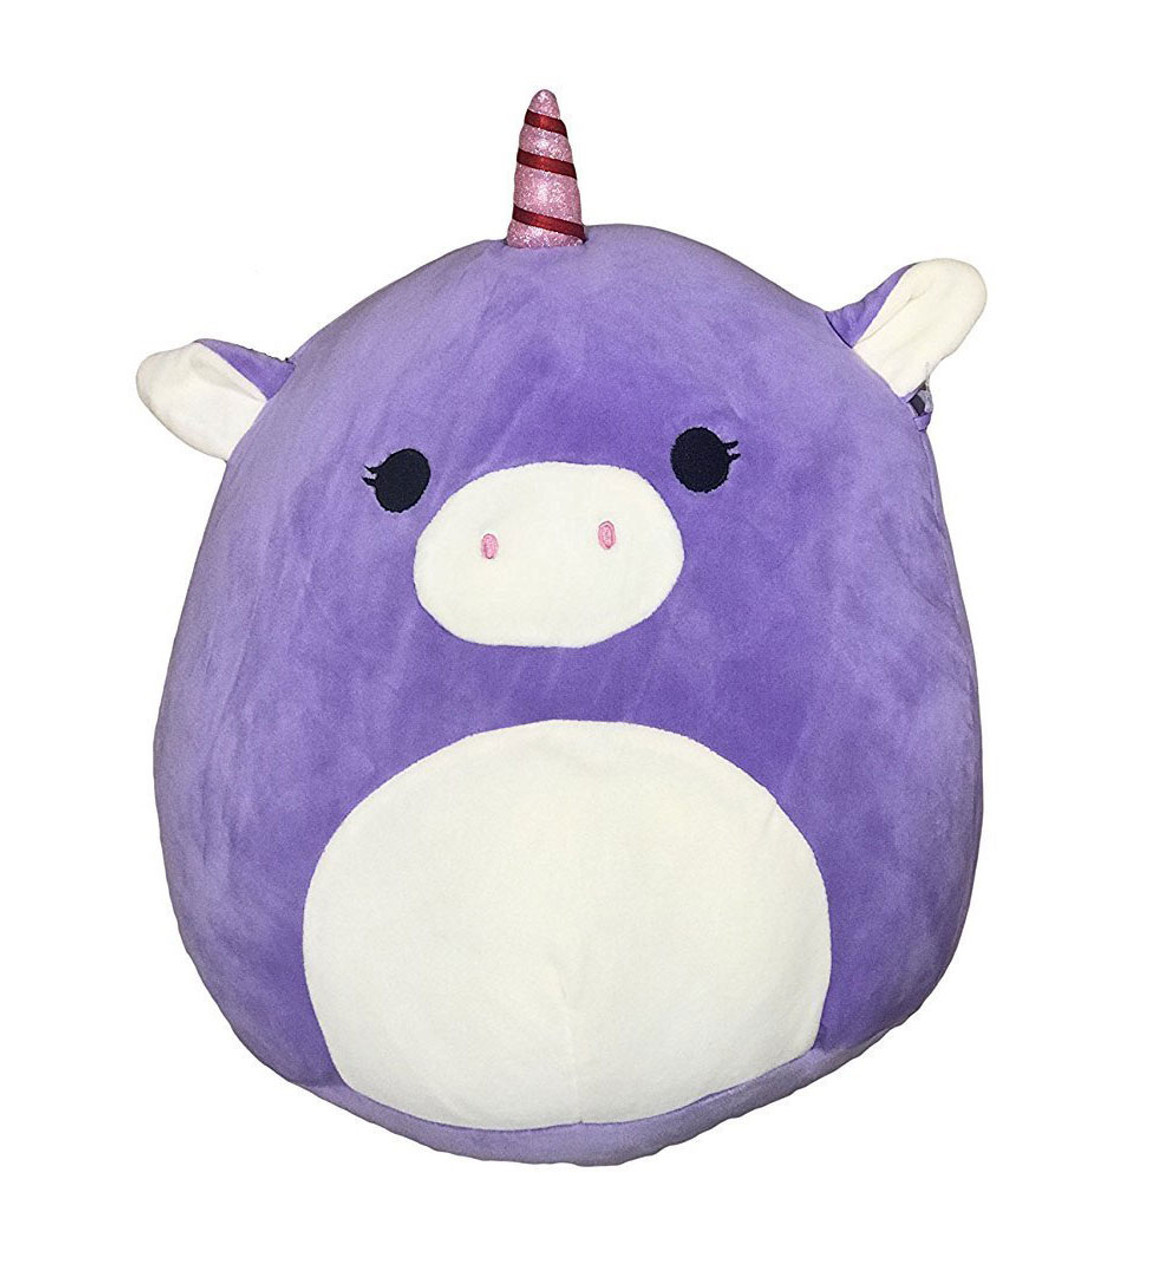 https://cdn11.bigcommerce.com/s-mhr53lwccw/images/stencil/1280x1280/products/1250/8459/squishmallows-astrid-unicorn-squishy-soft-plush-toy-5-inch__52345.1663975738.jpg?c=1?imbypass=on